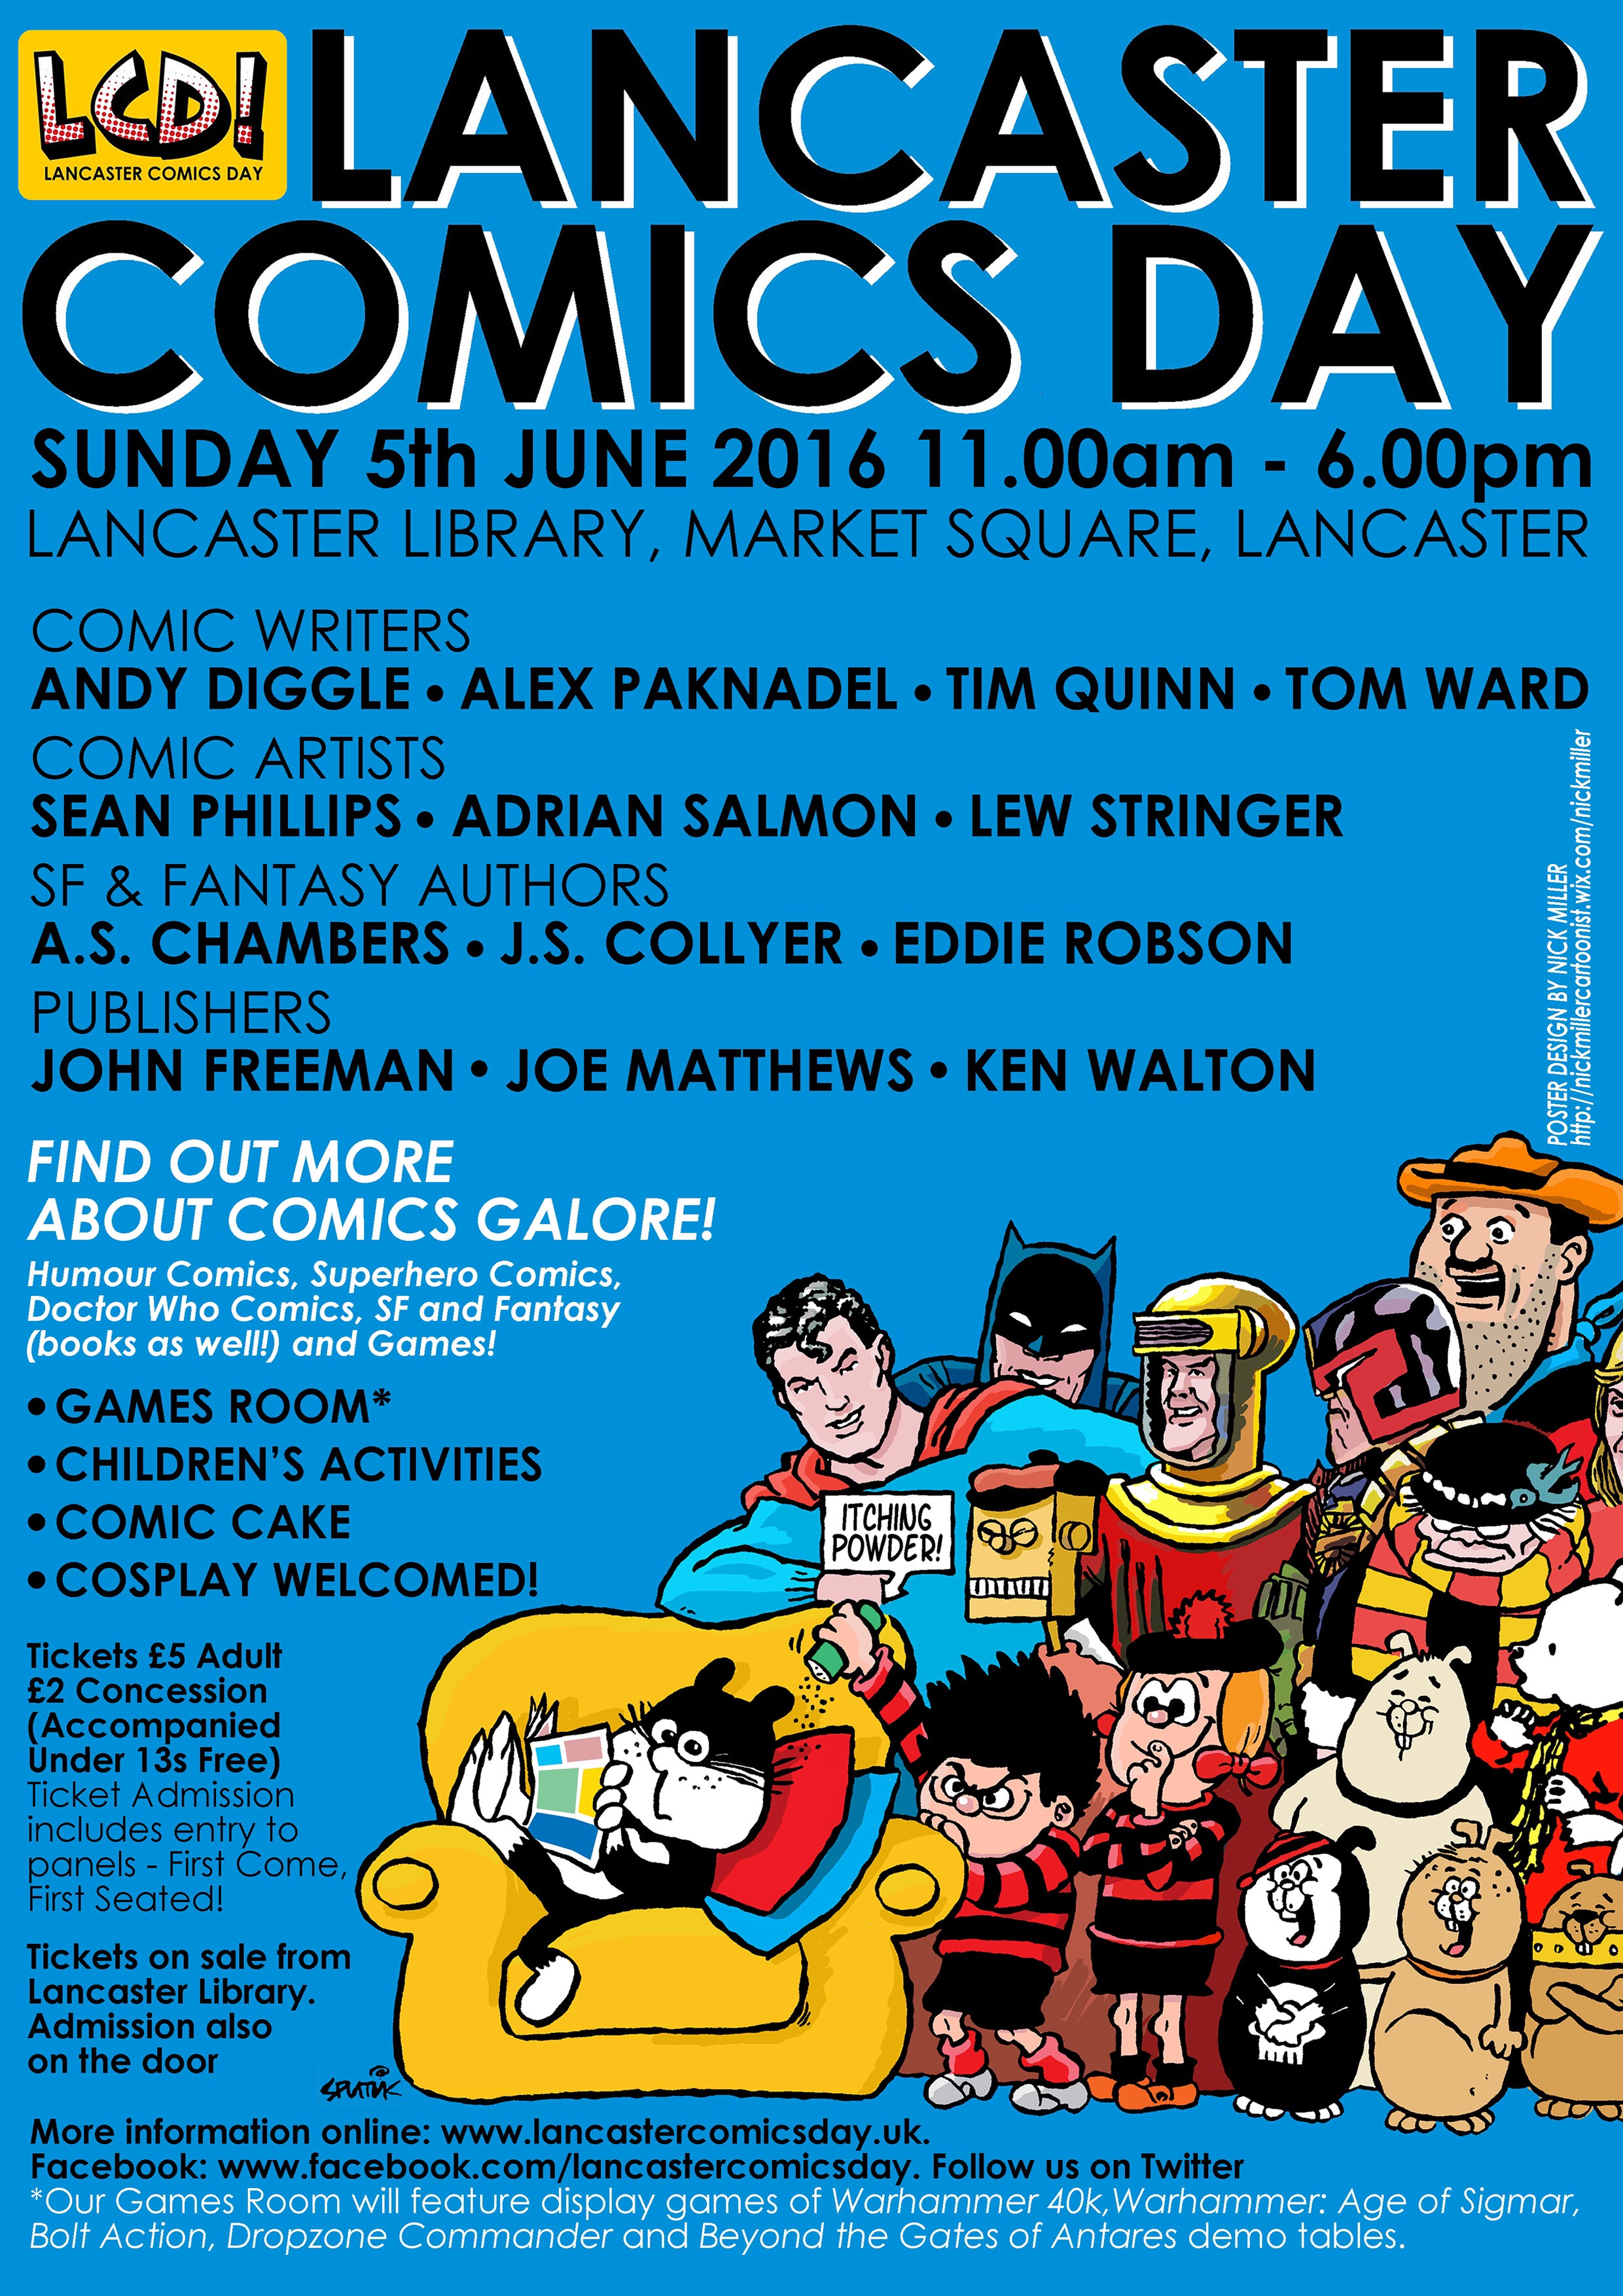 The official 2016 Lancaster Comics Day poster, art by local comics creator Nick Miller.